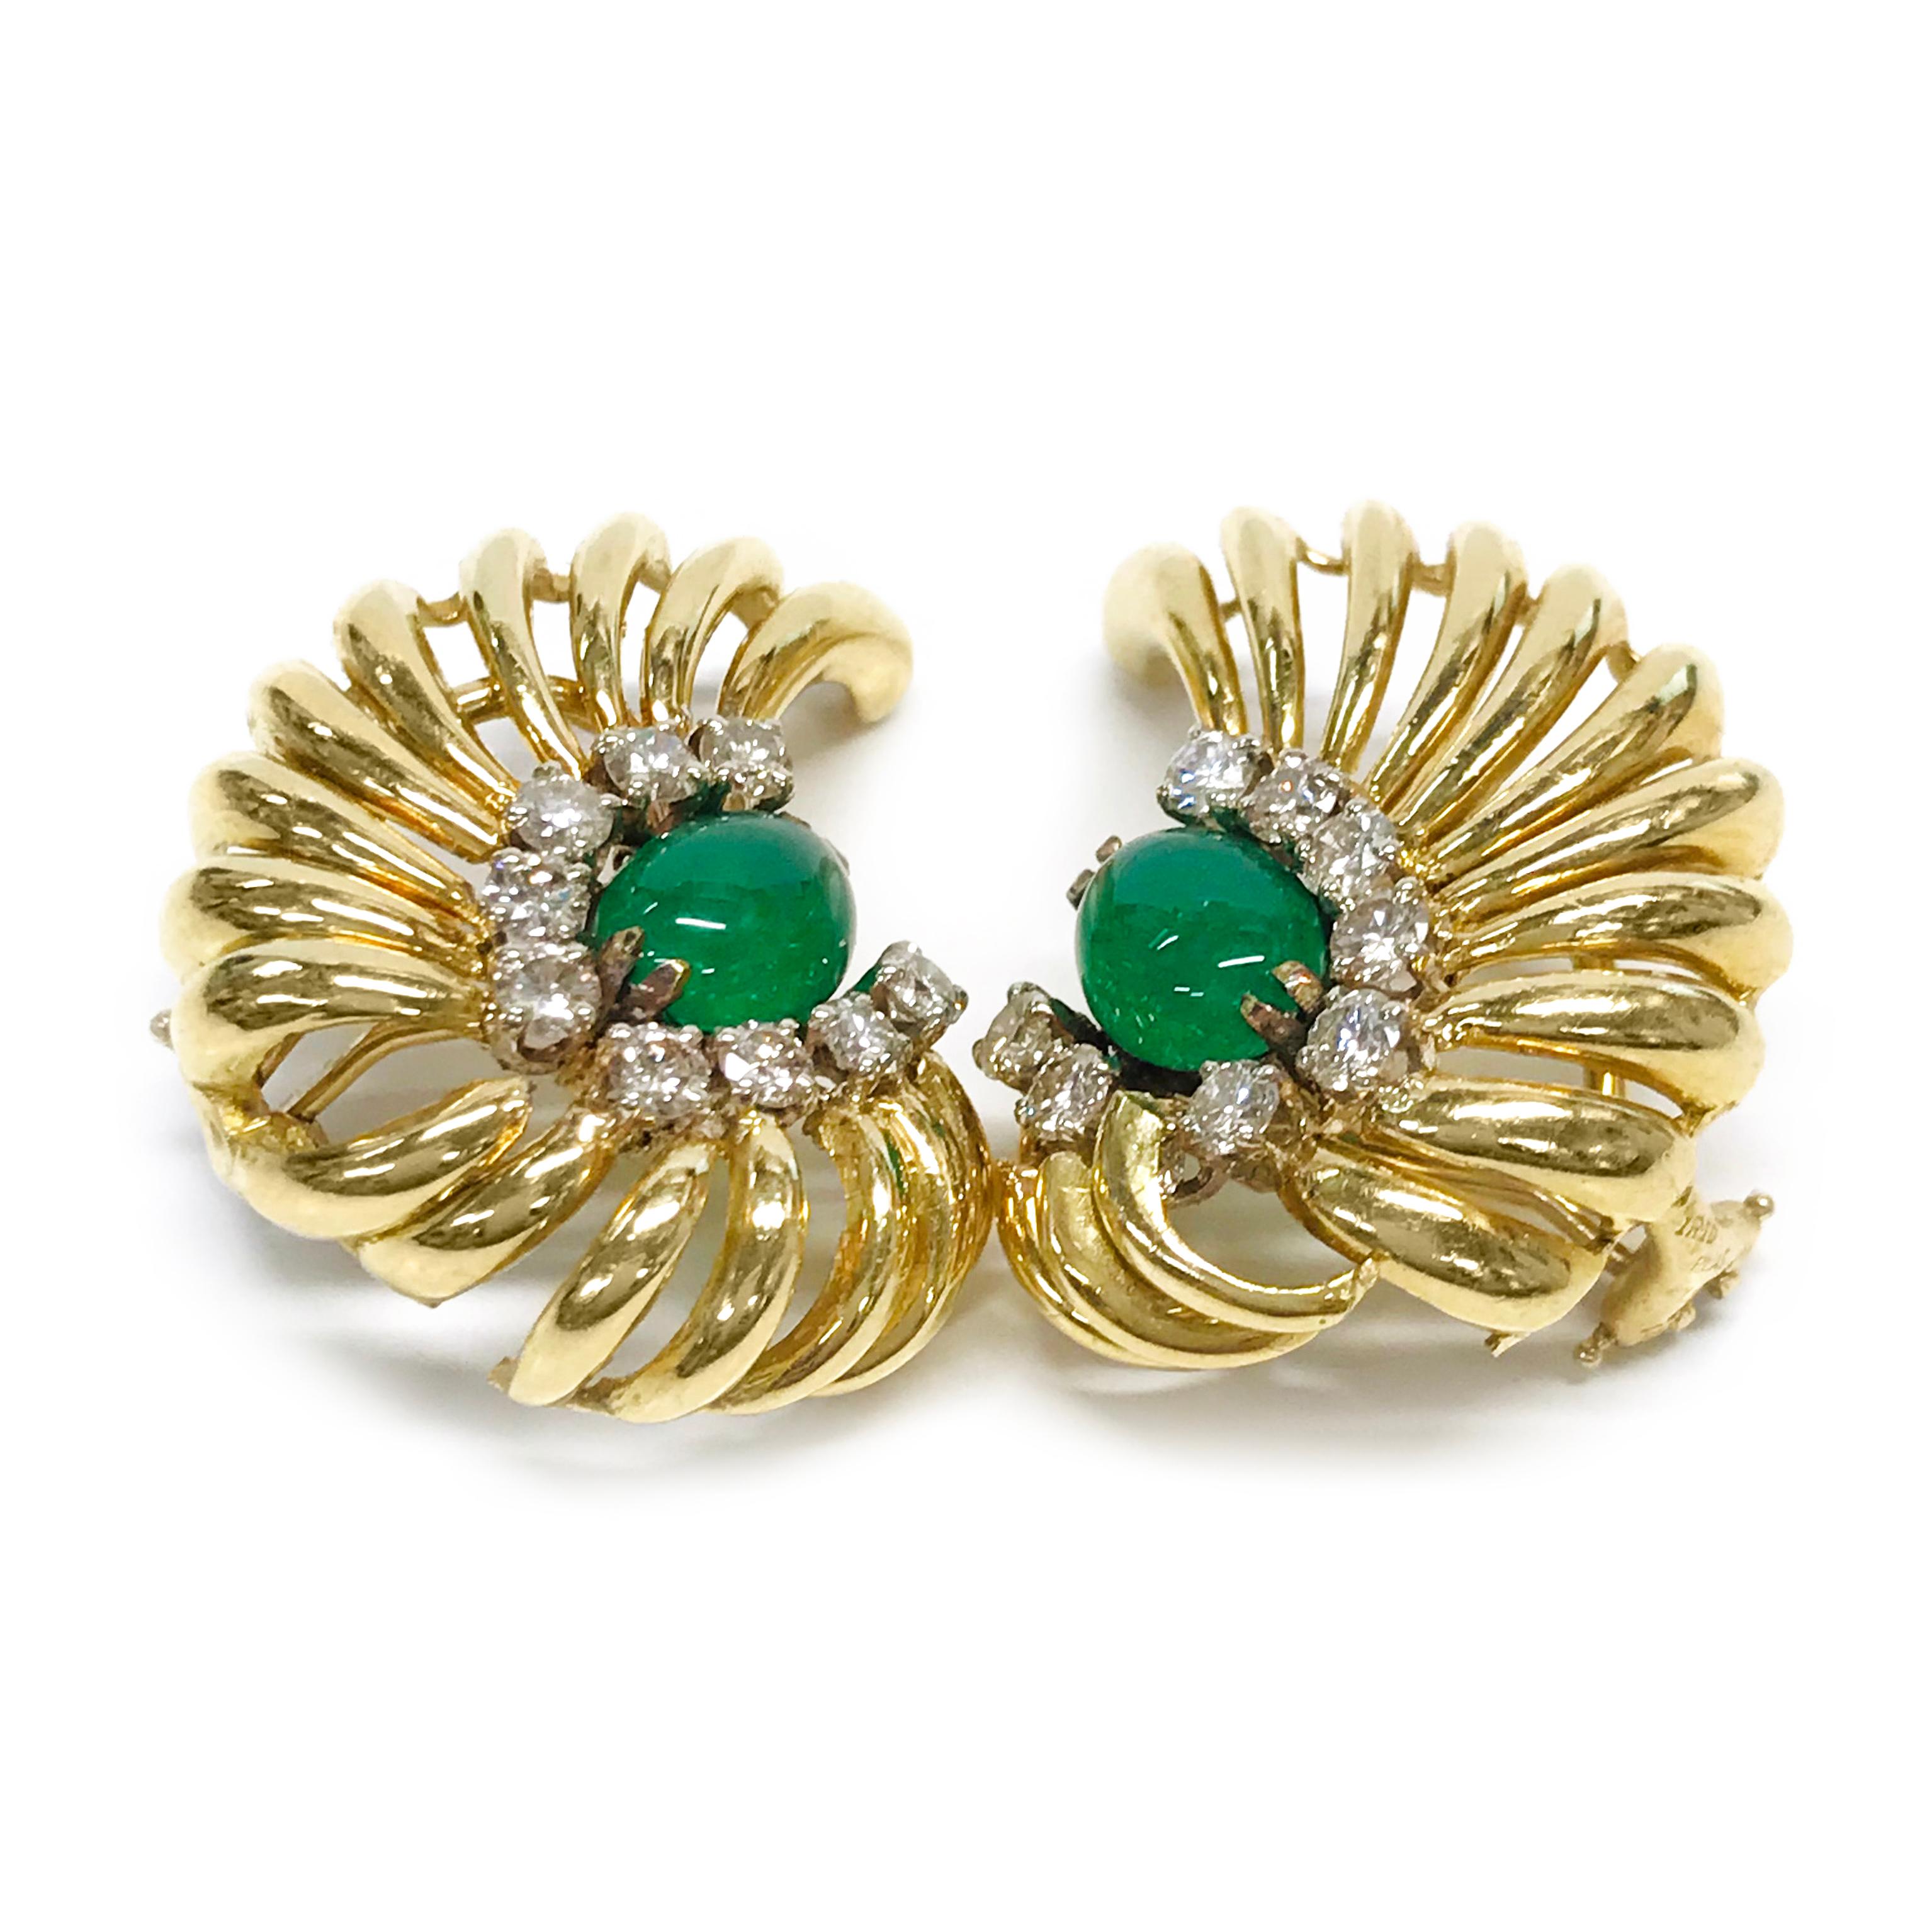 18 Karat Emerald Diamond Clip-on Earrings. Each earring features a 9mm x 6.5mm oval Emerald cabochon set with two double prongs and nine round prong-set diamonds around the bezel and gold wing-like swooshes that extend out. The diamonds are round